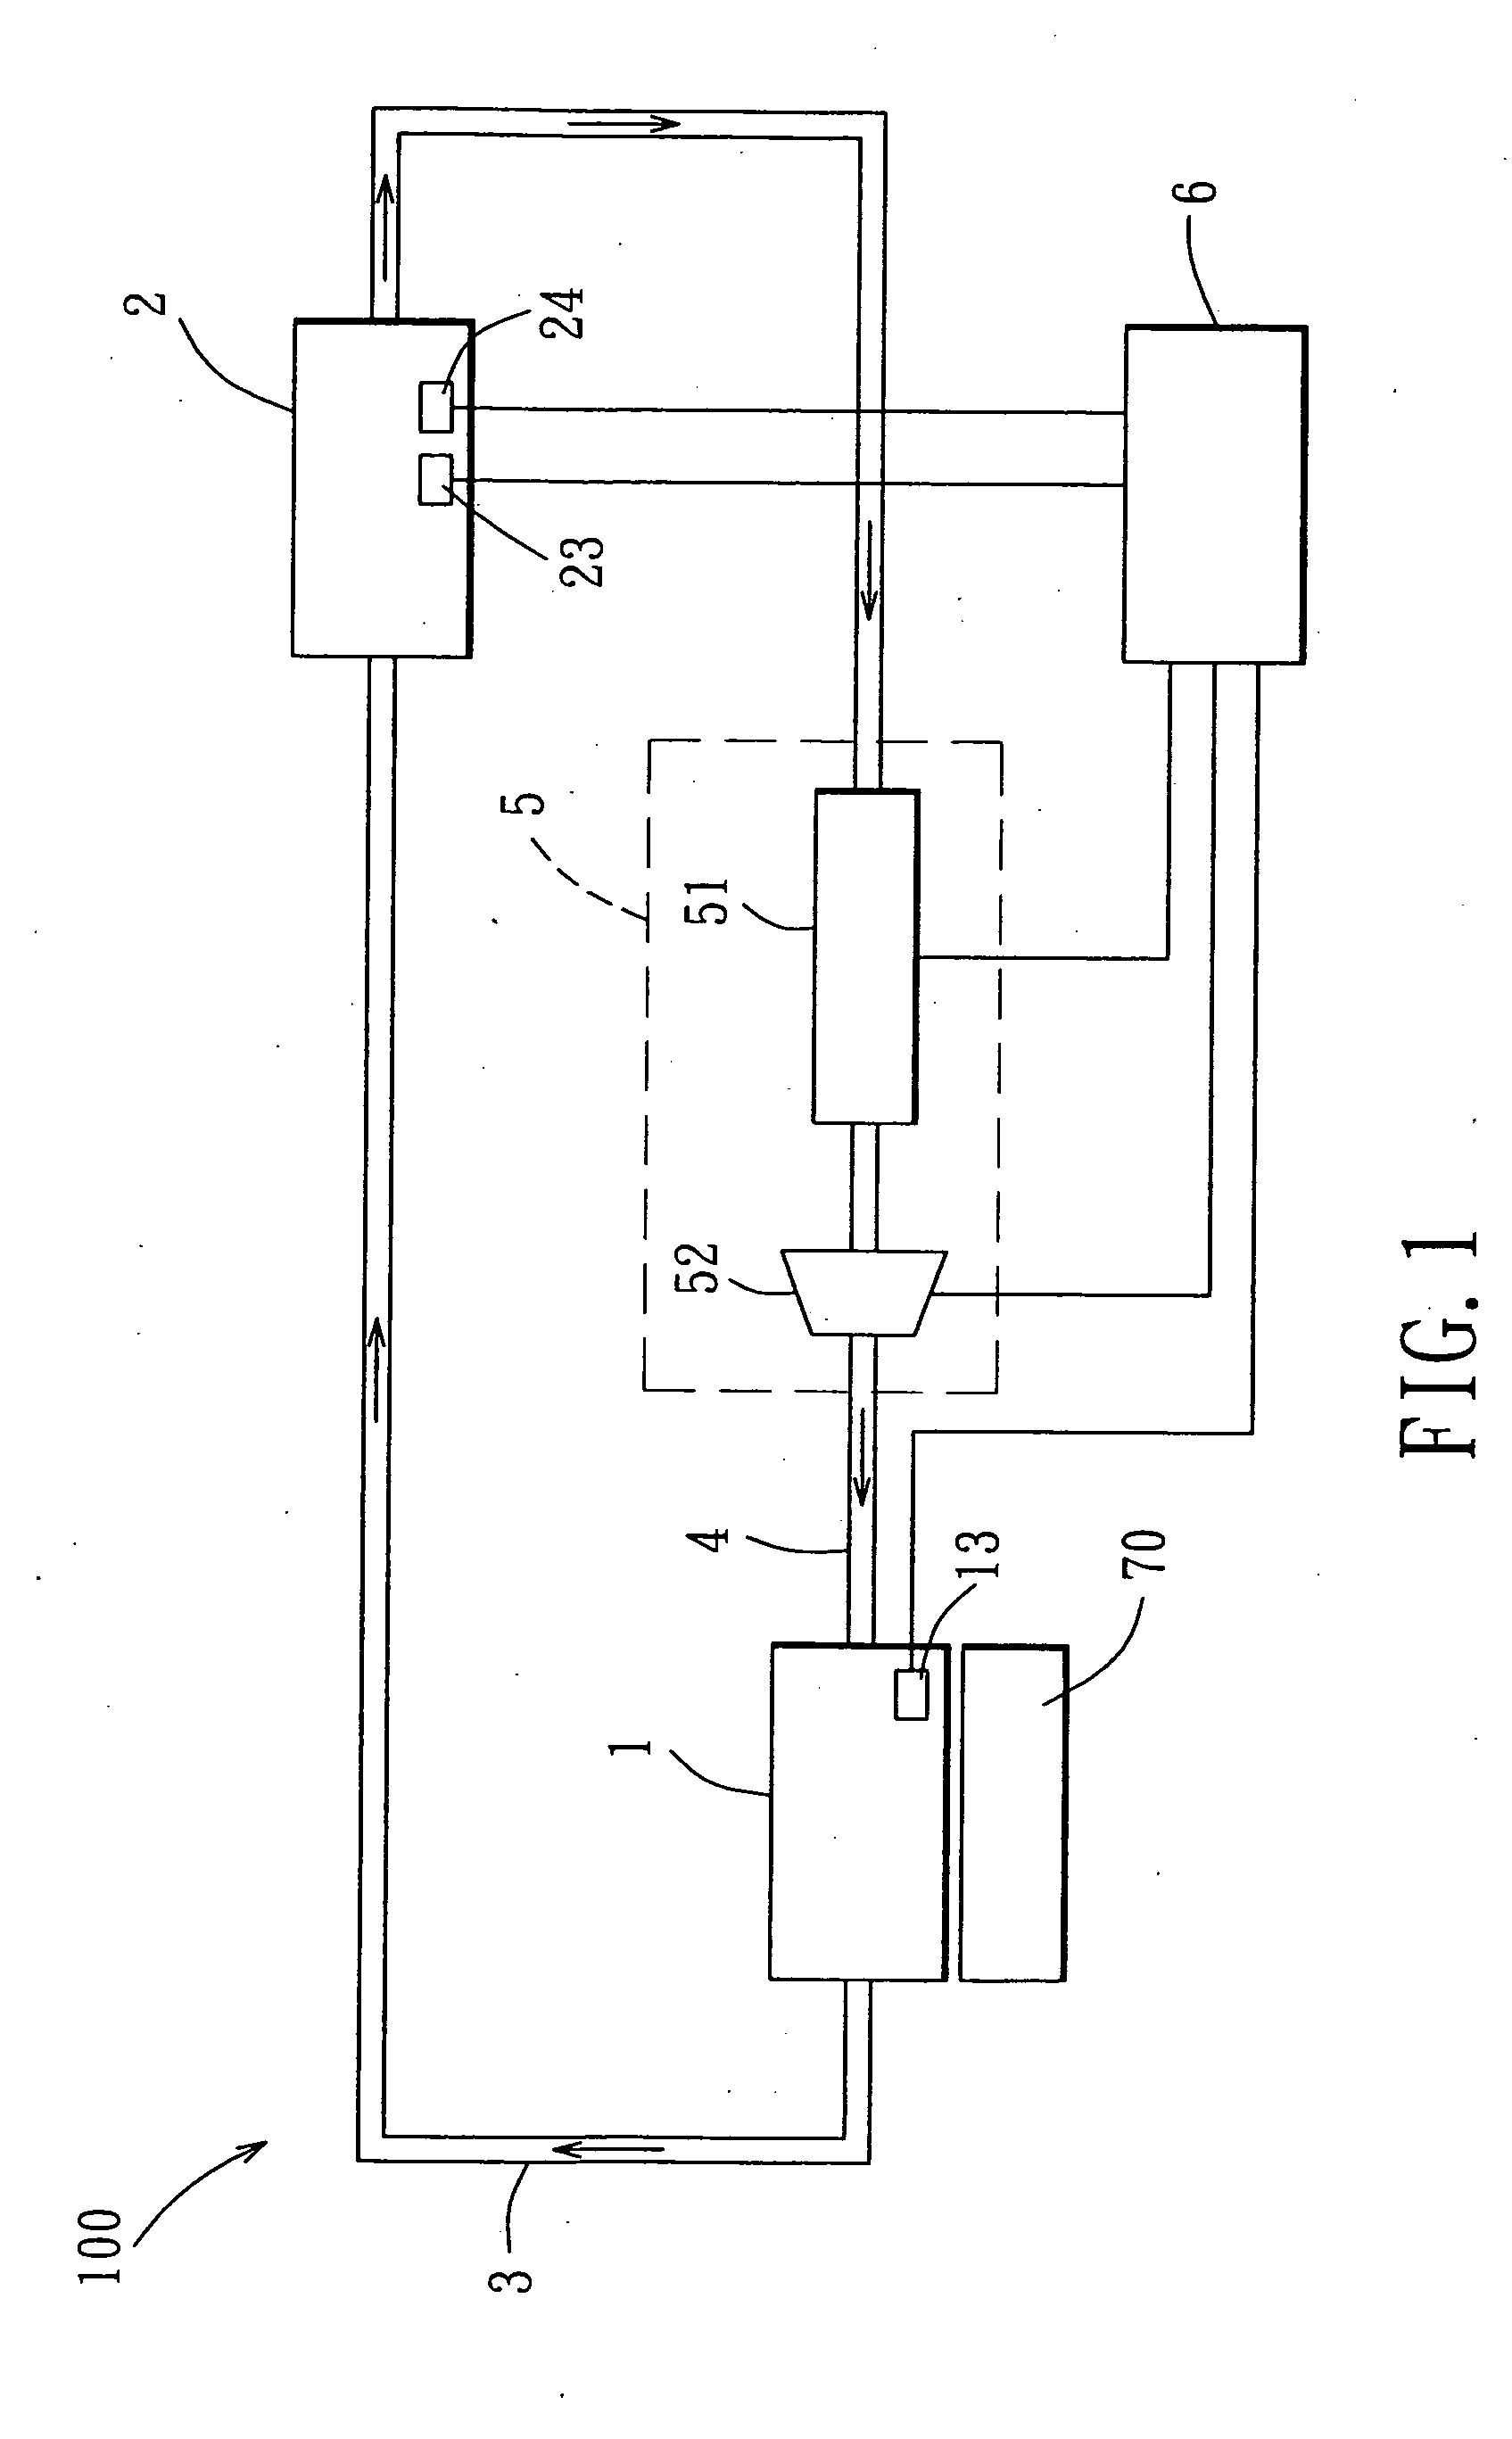 Heat dissipation system with a spray cooling device